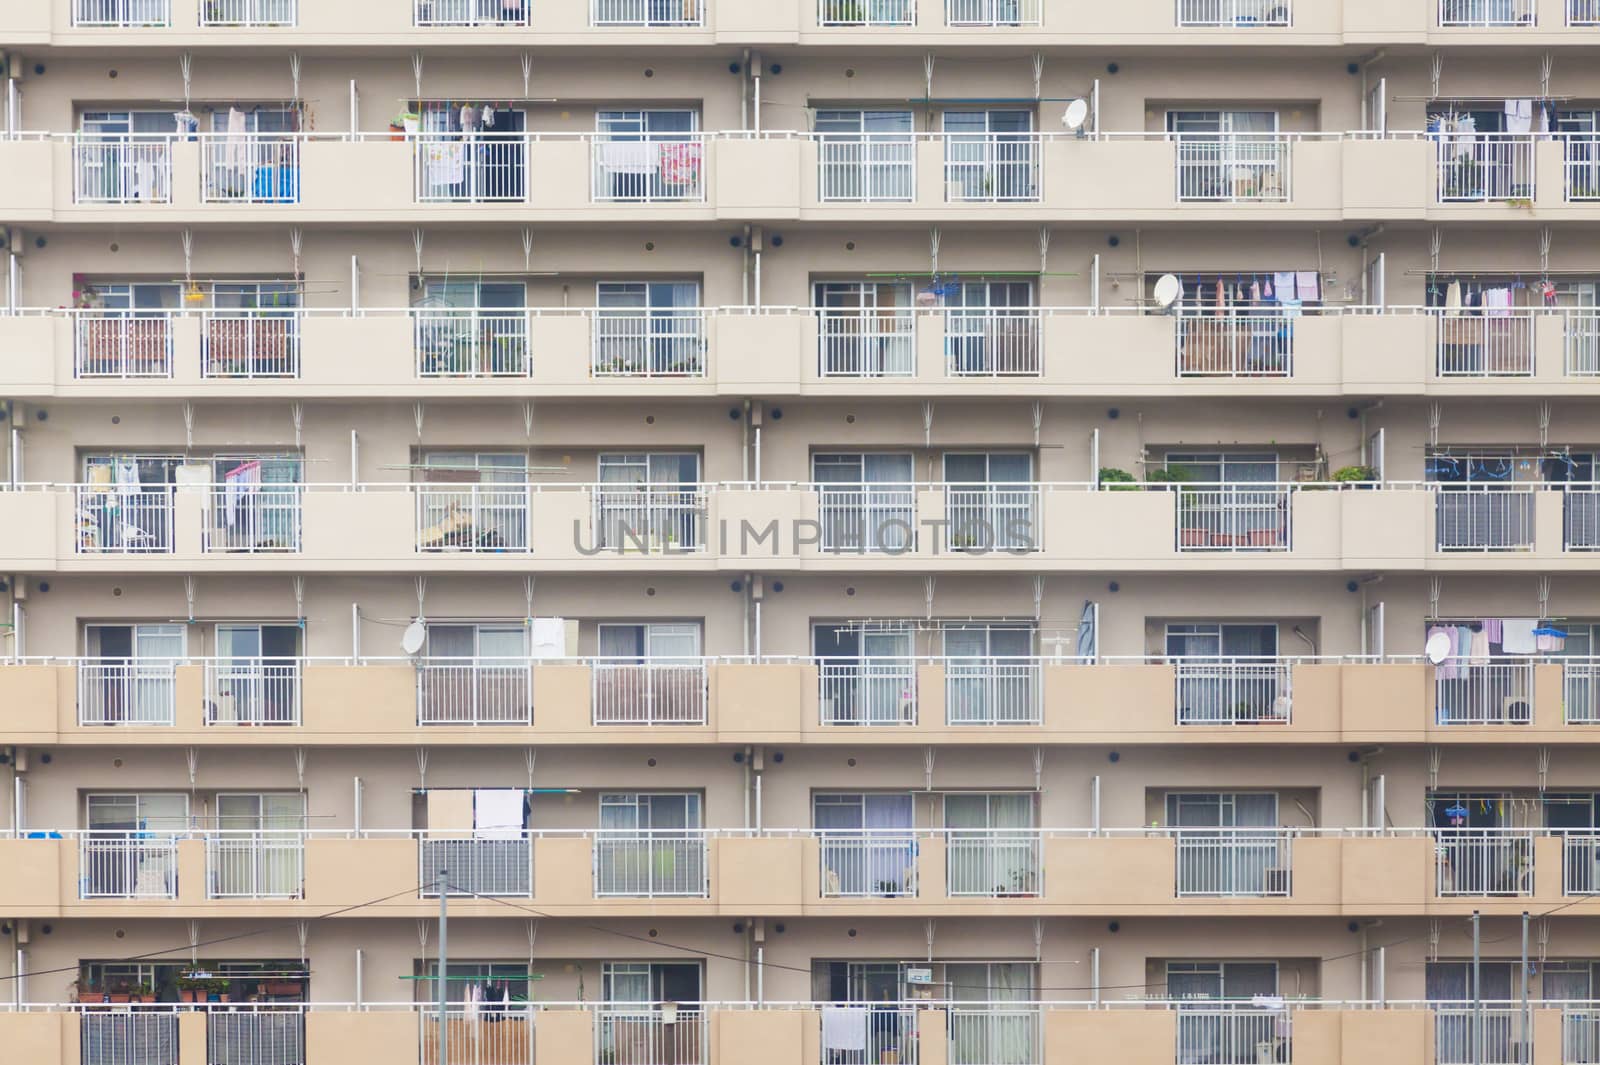 Facade of a multi-storey apartment building in Japan